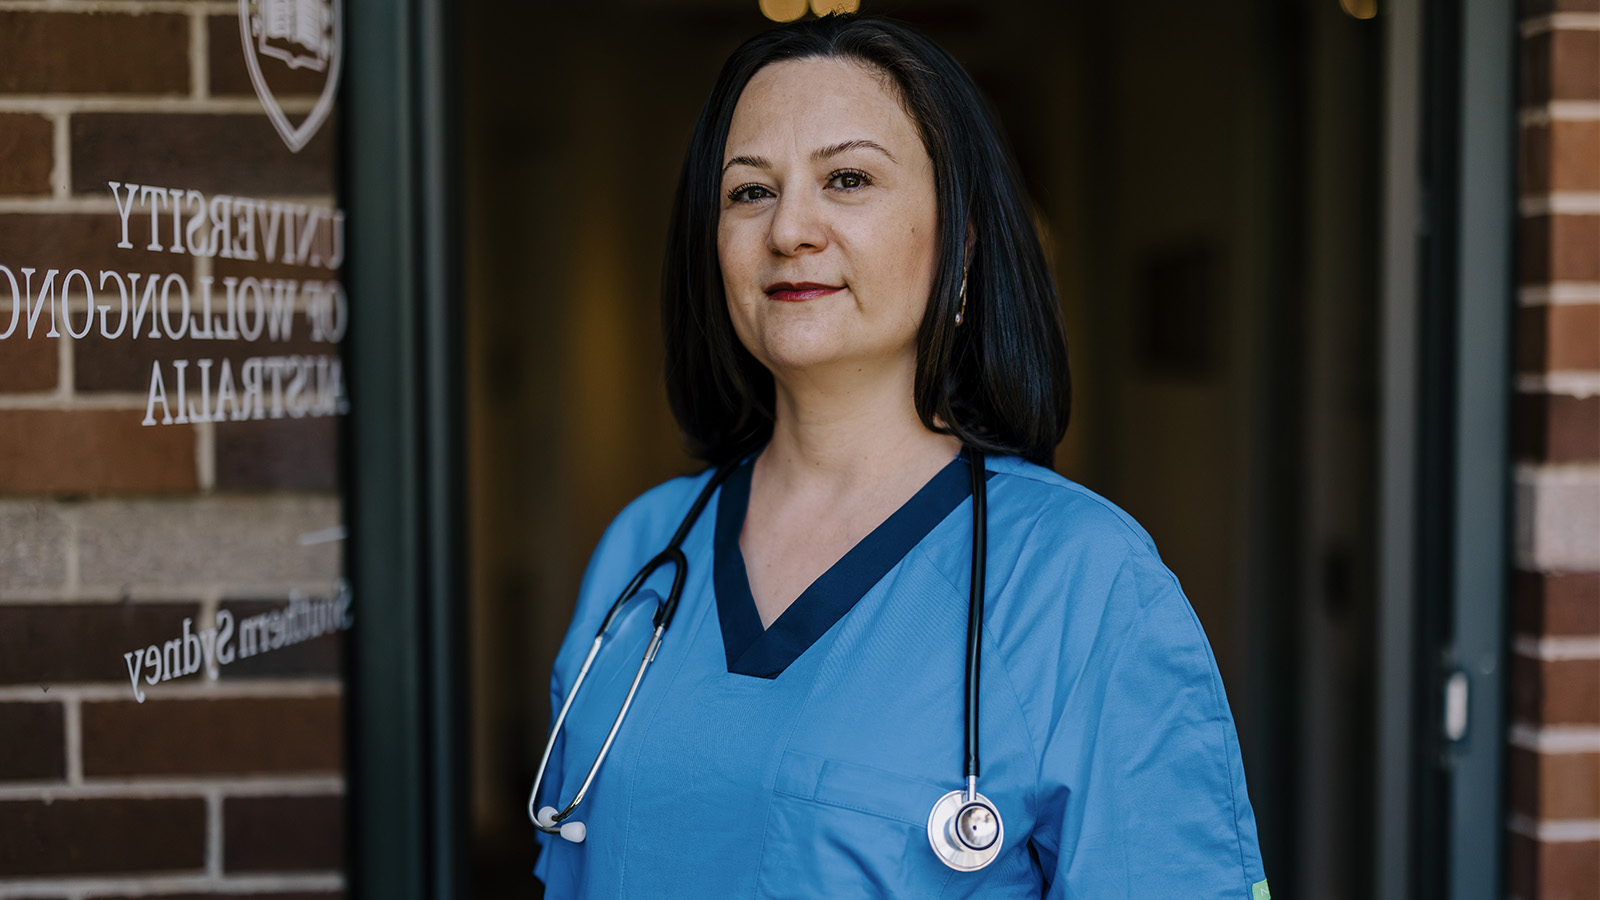 Laureine Gabriel is standing in front of the UOW Sutherland door wearing blue scrubs and a stethoscope.